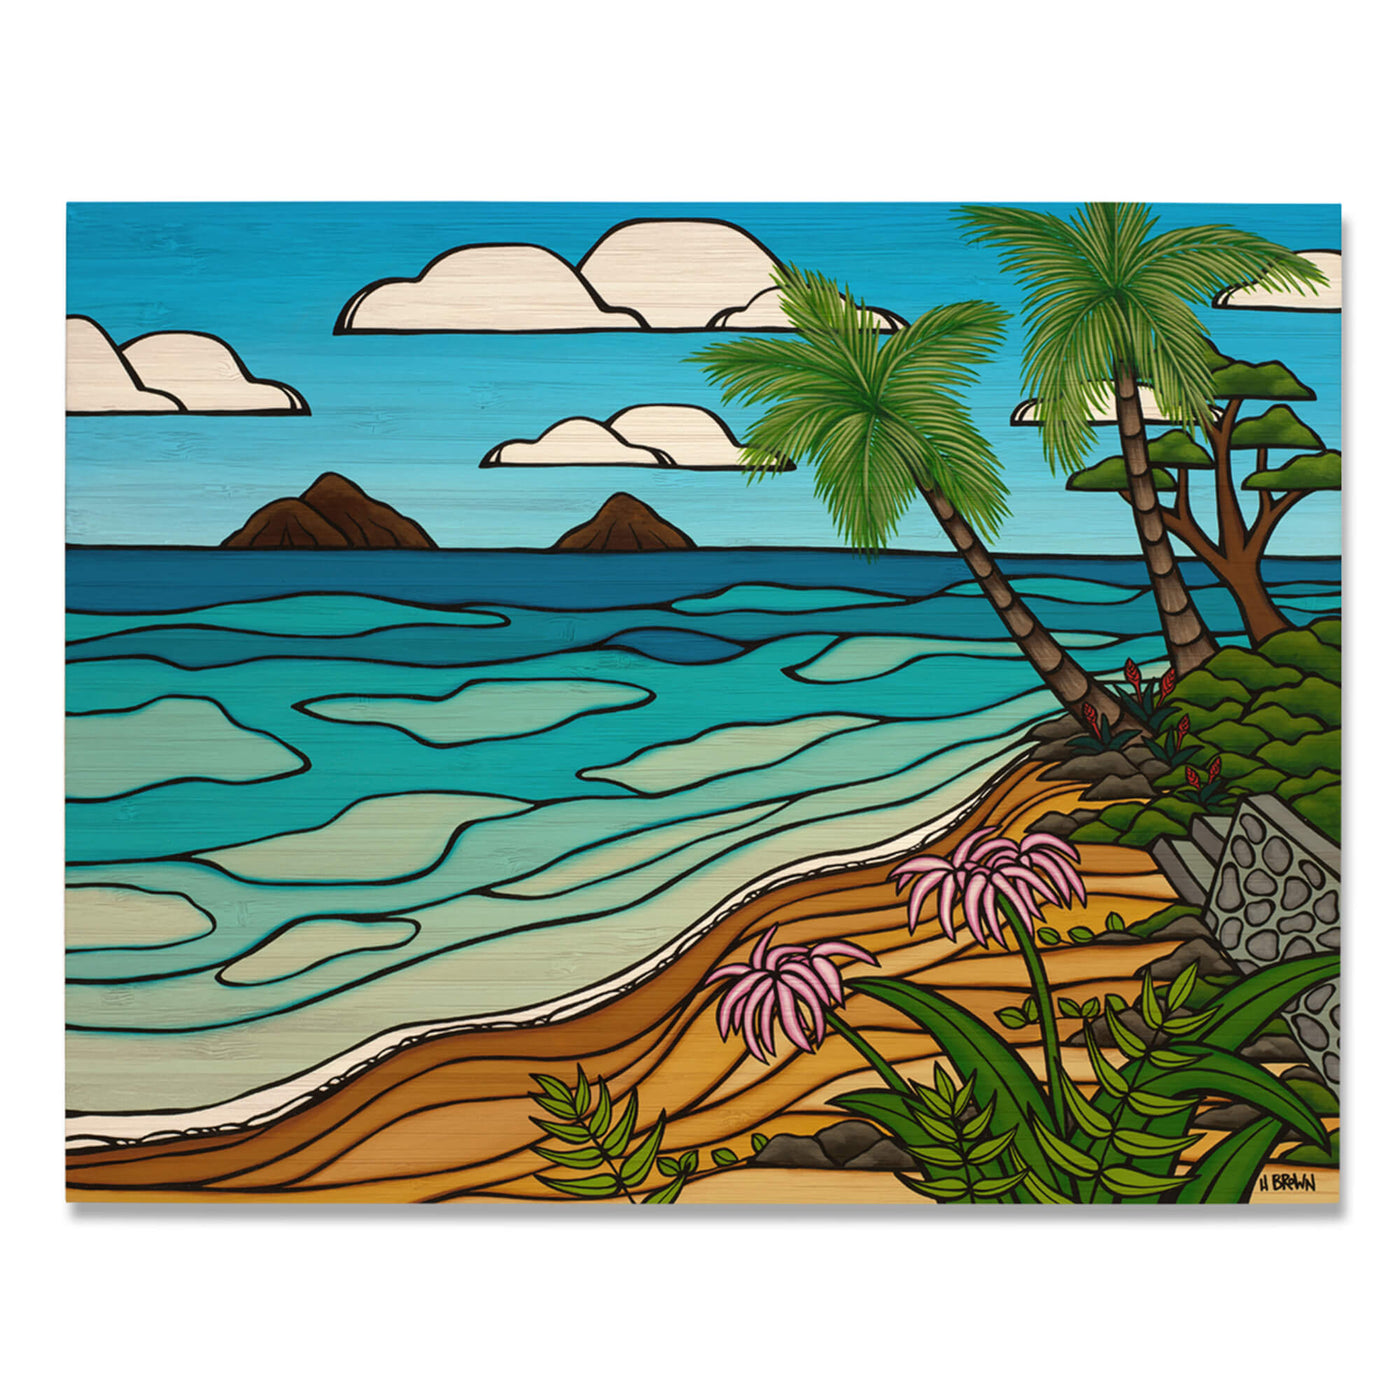 Coconut trees and tropical flowers framing a beautiful seascape by Hawaii surf artist Heather Brown